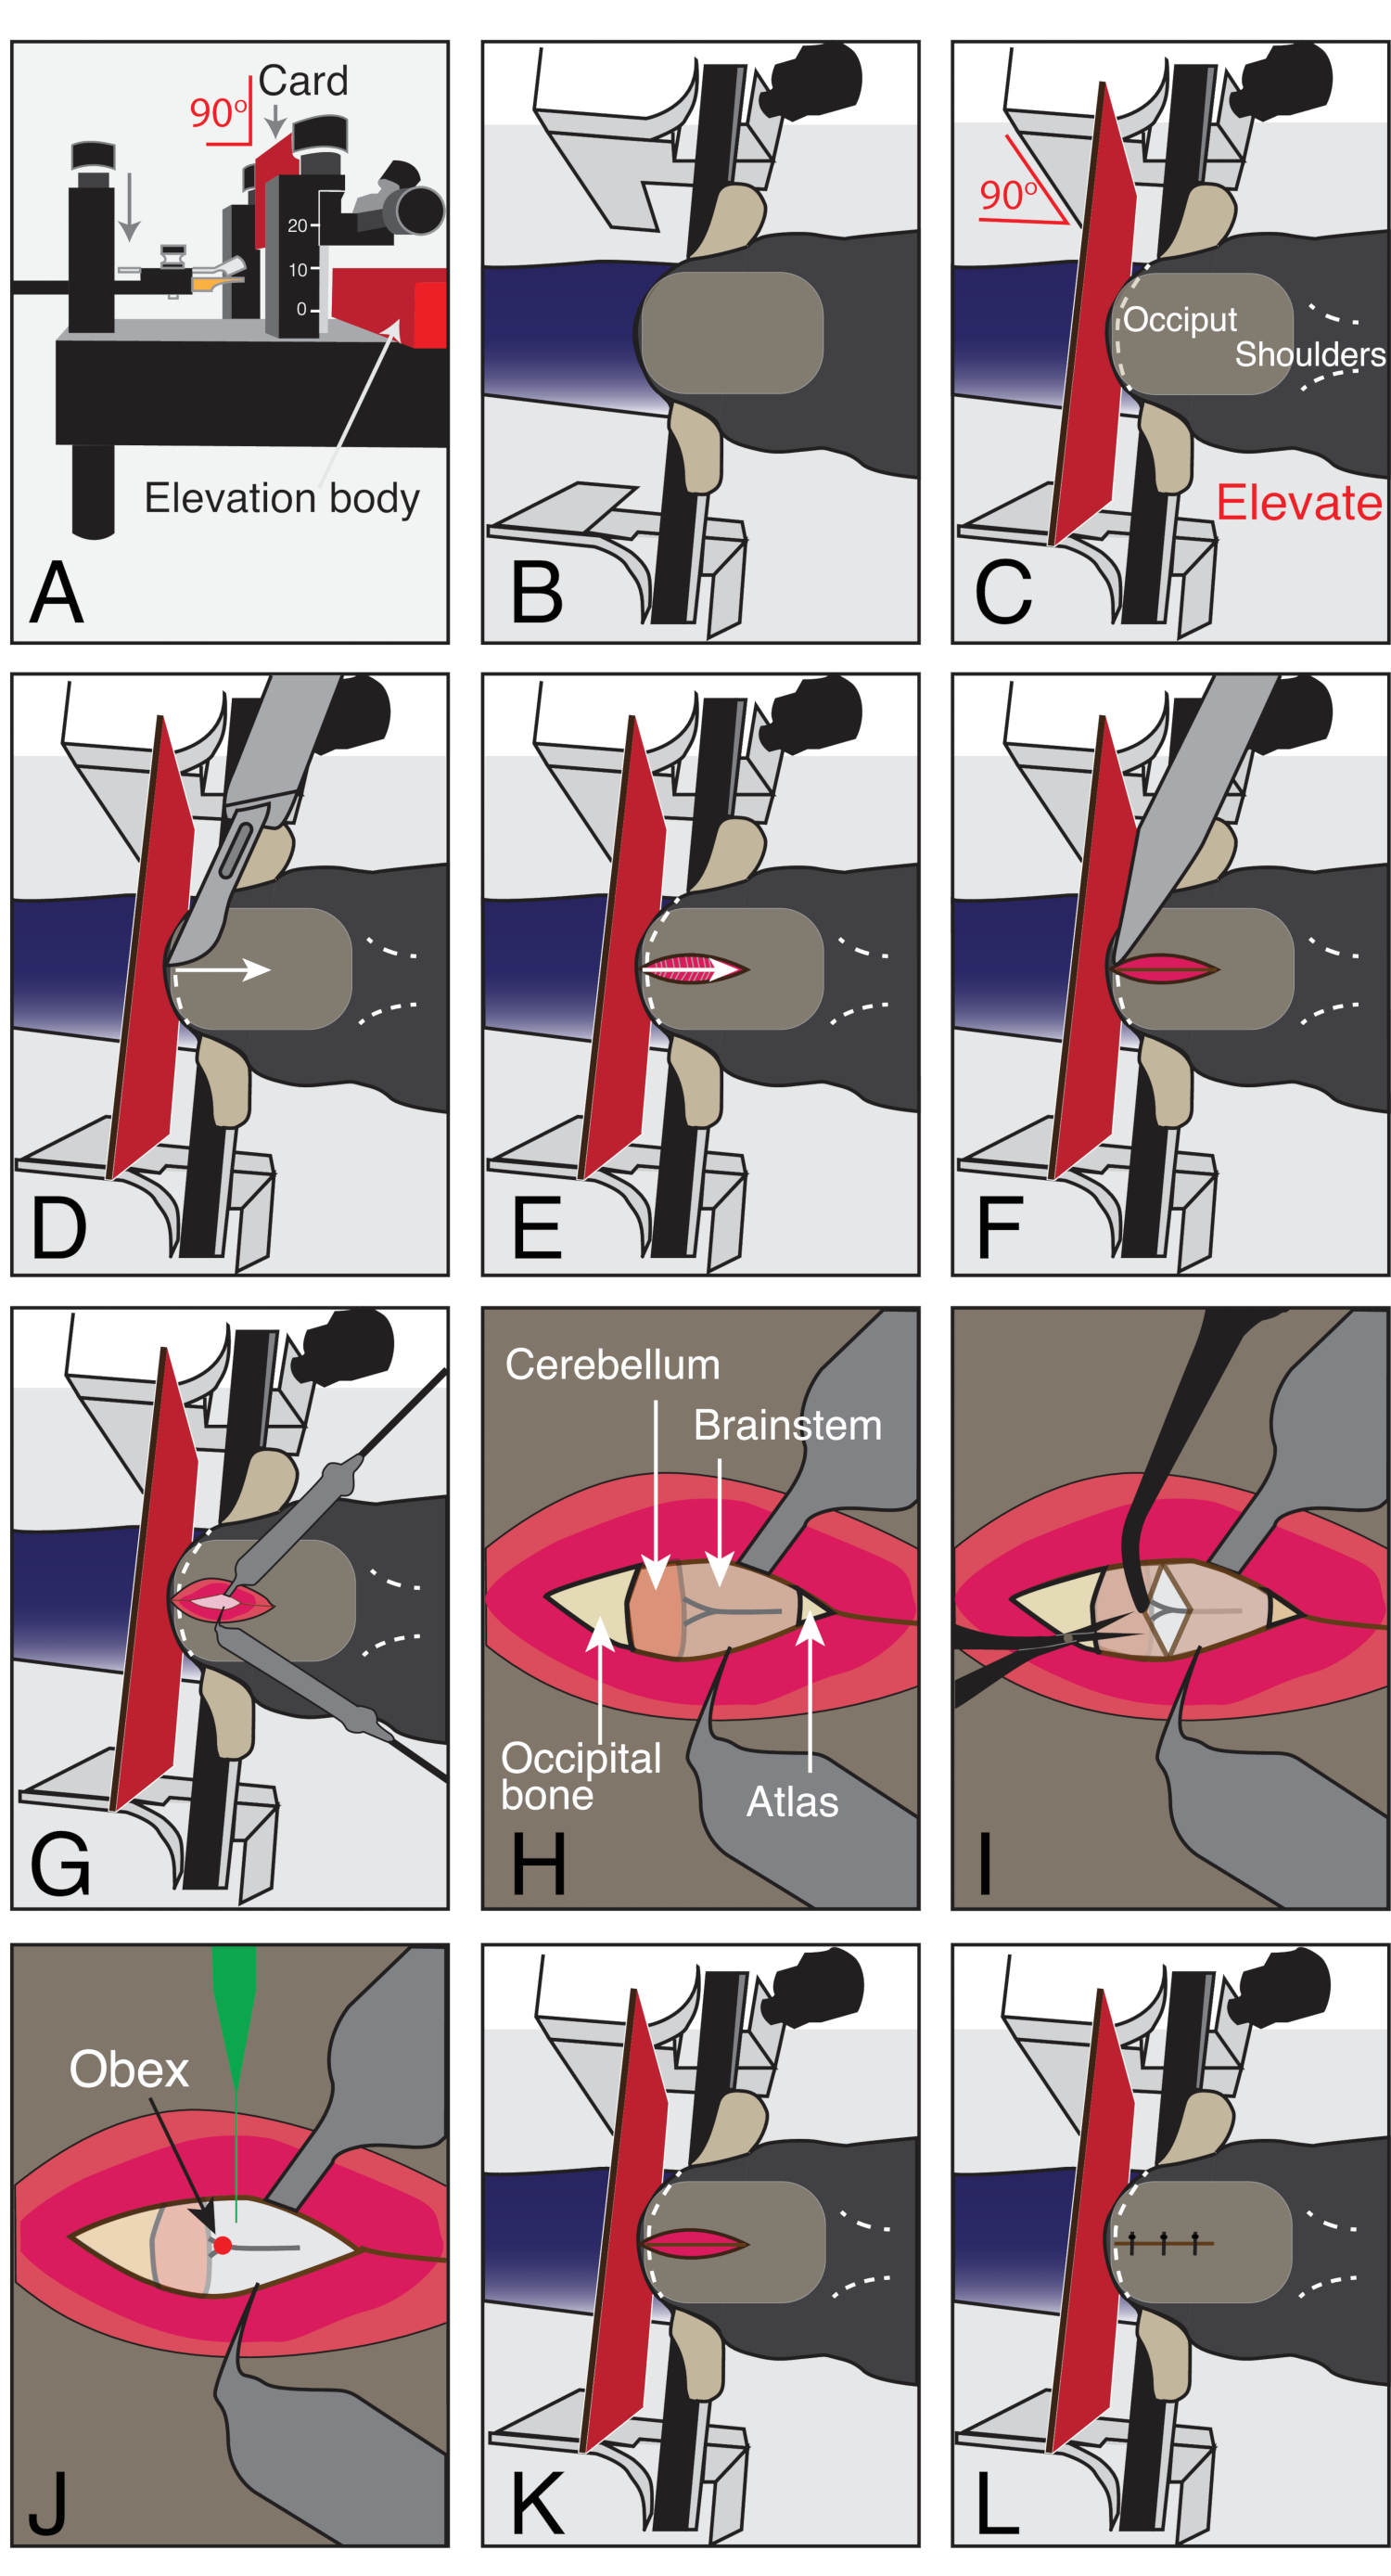 Stereotaxic Surgical Approach to Microinject the Caudal Brainstem 